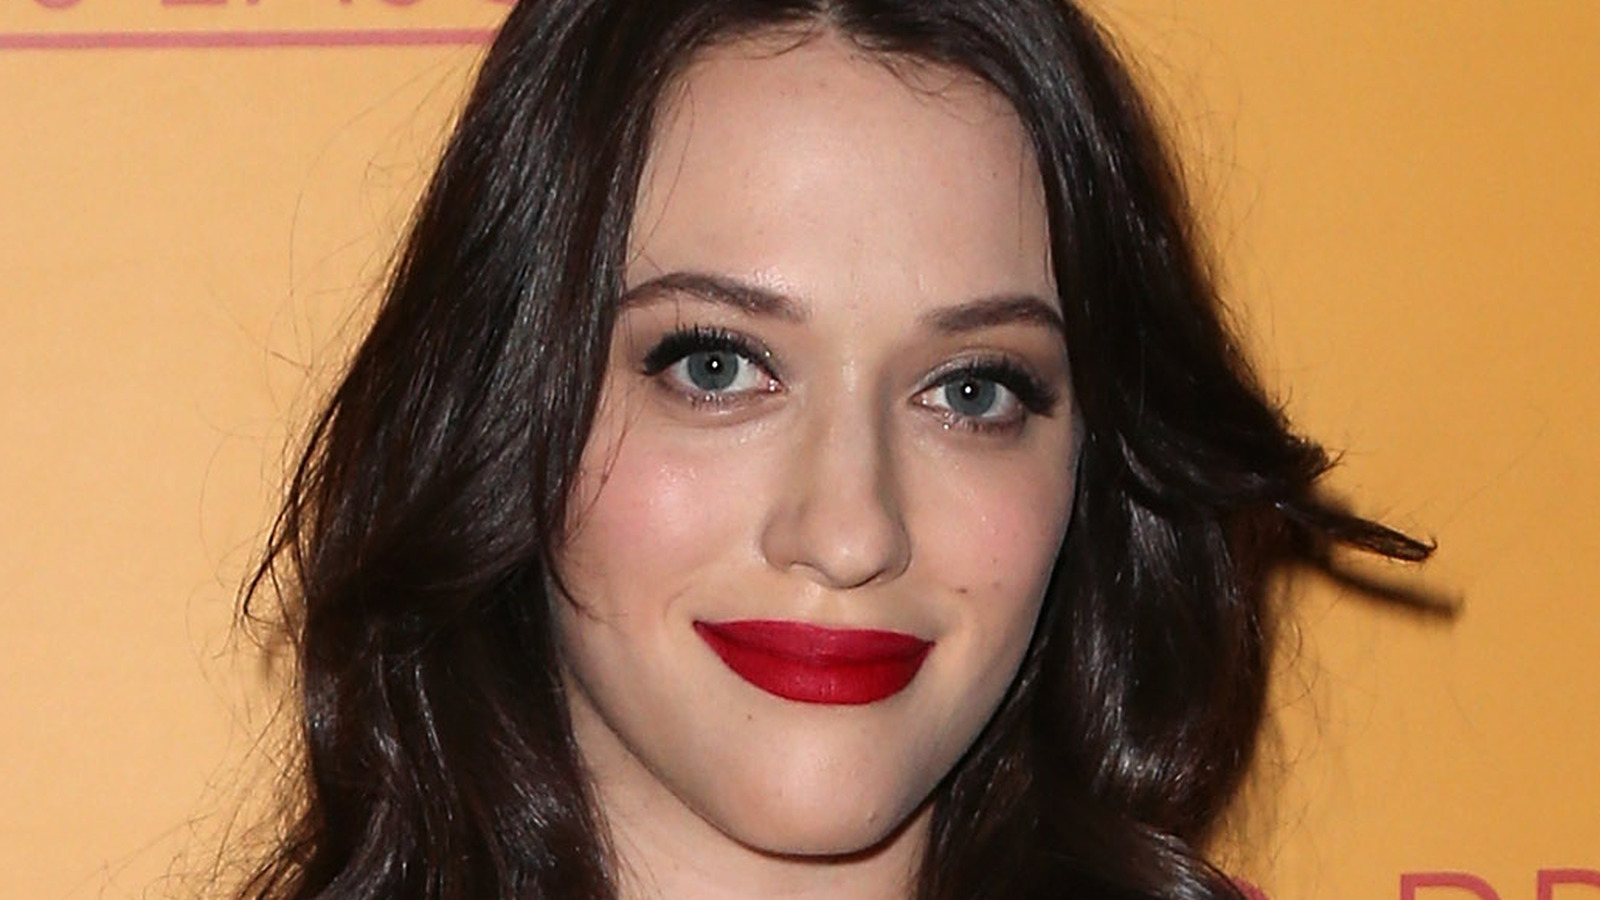 Kat Dennings Porn - The Transformation Of Kat Dennings From 9 To 35 Years Old